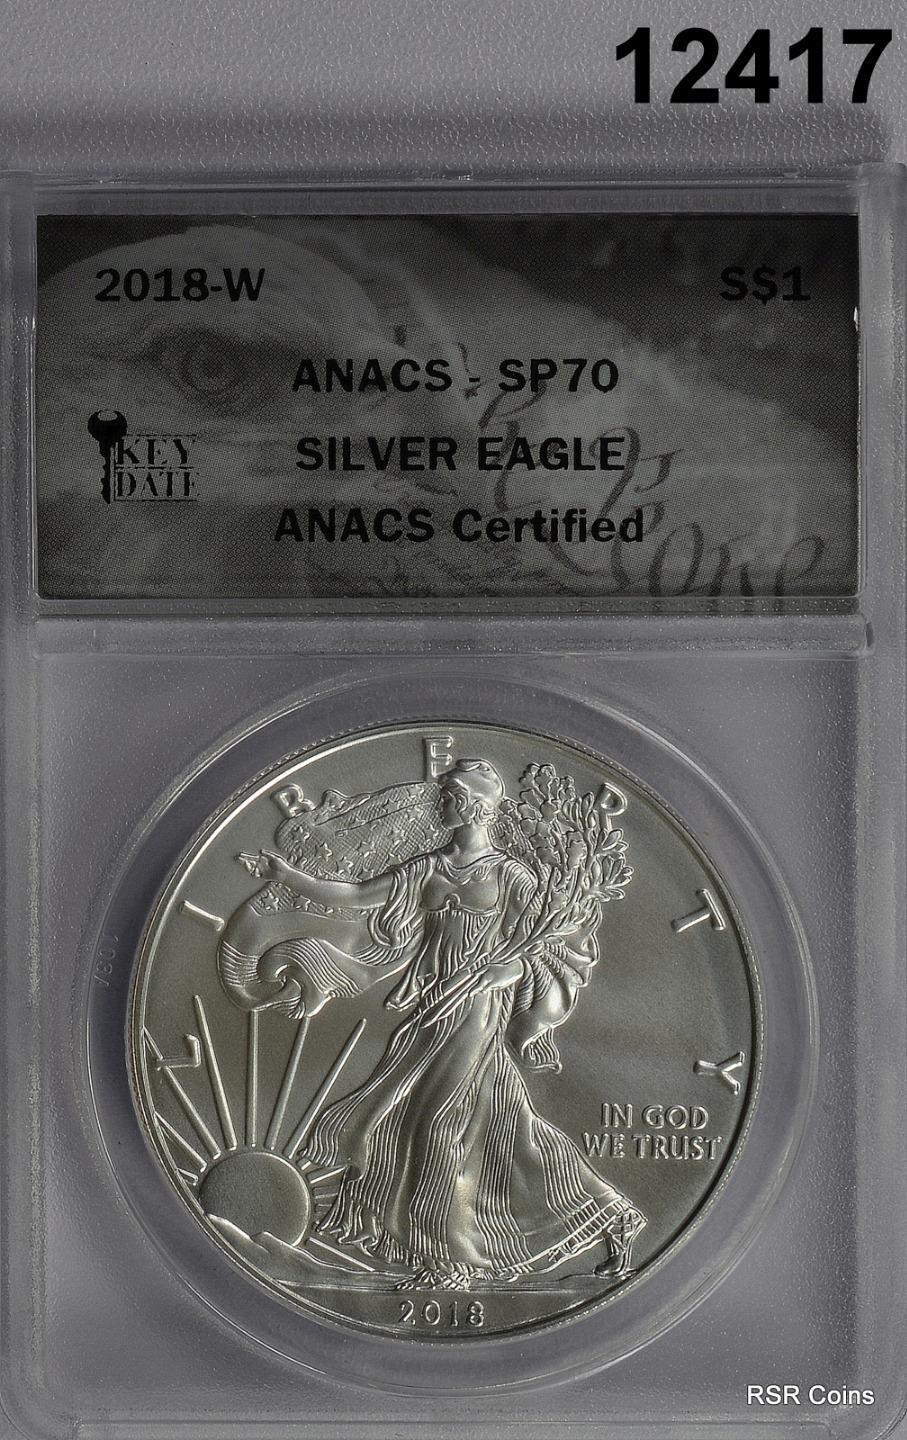 2018 W BURNISHED SILVER EAGLE ANACS CERTIFIED SP70 PERFECTION!! #12417